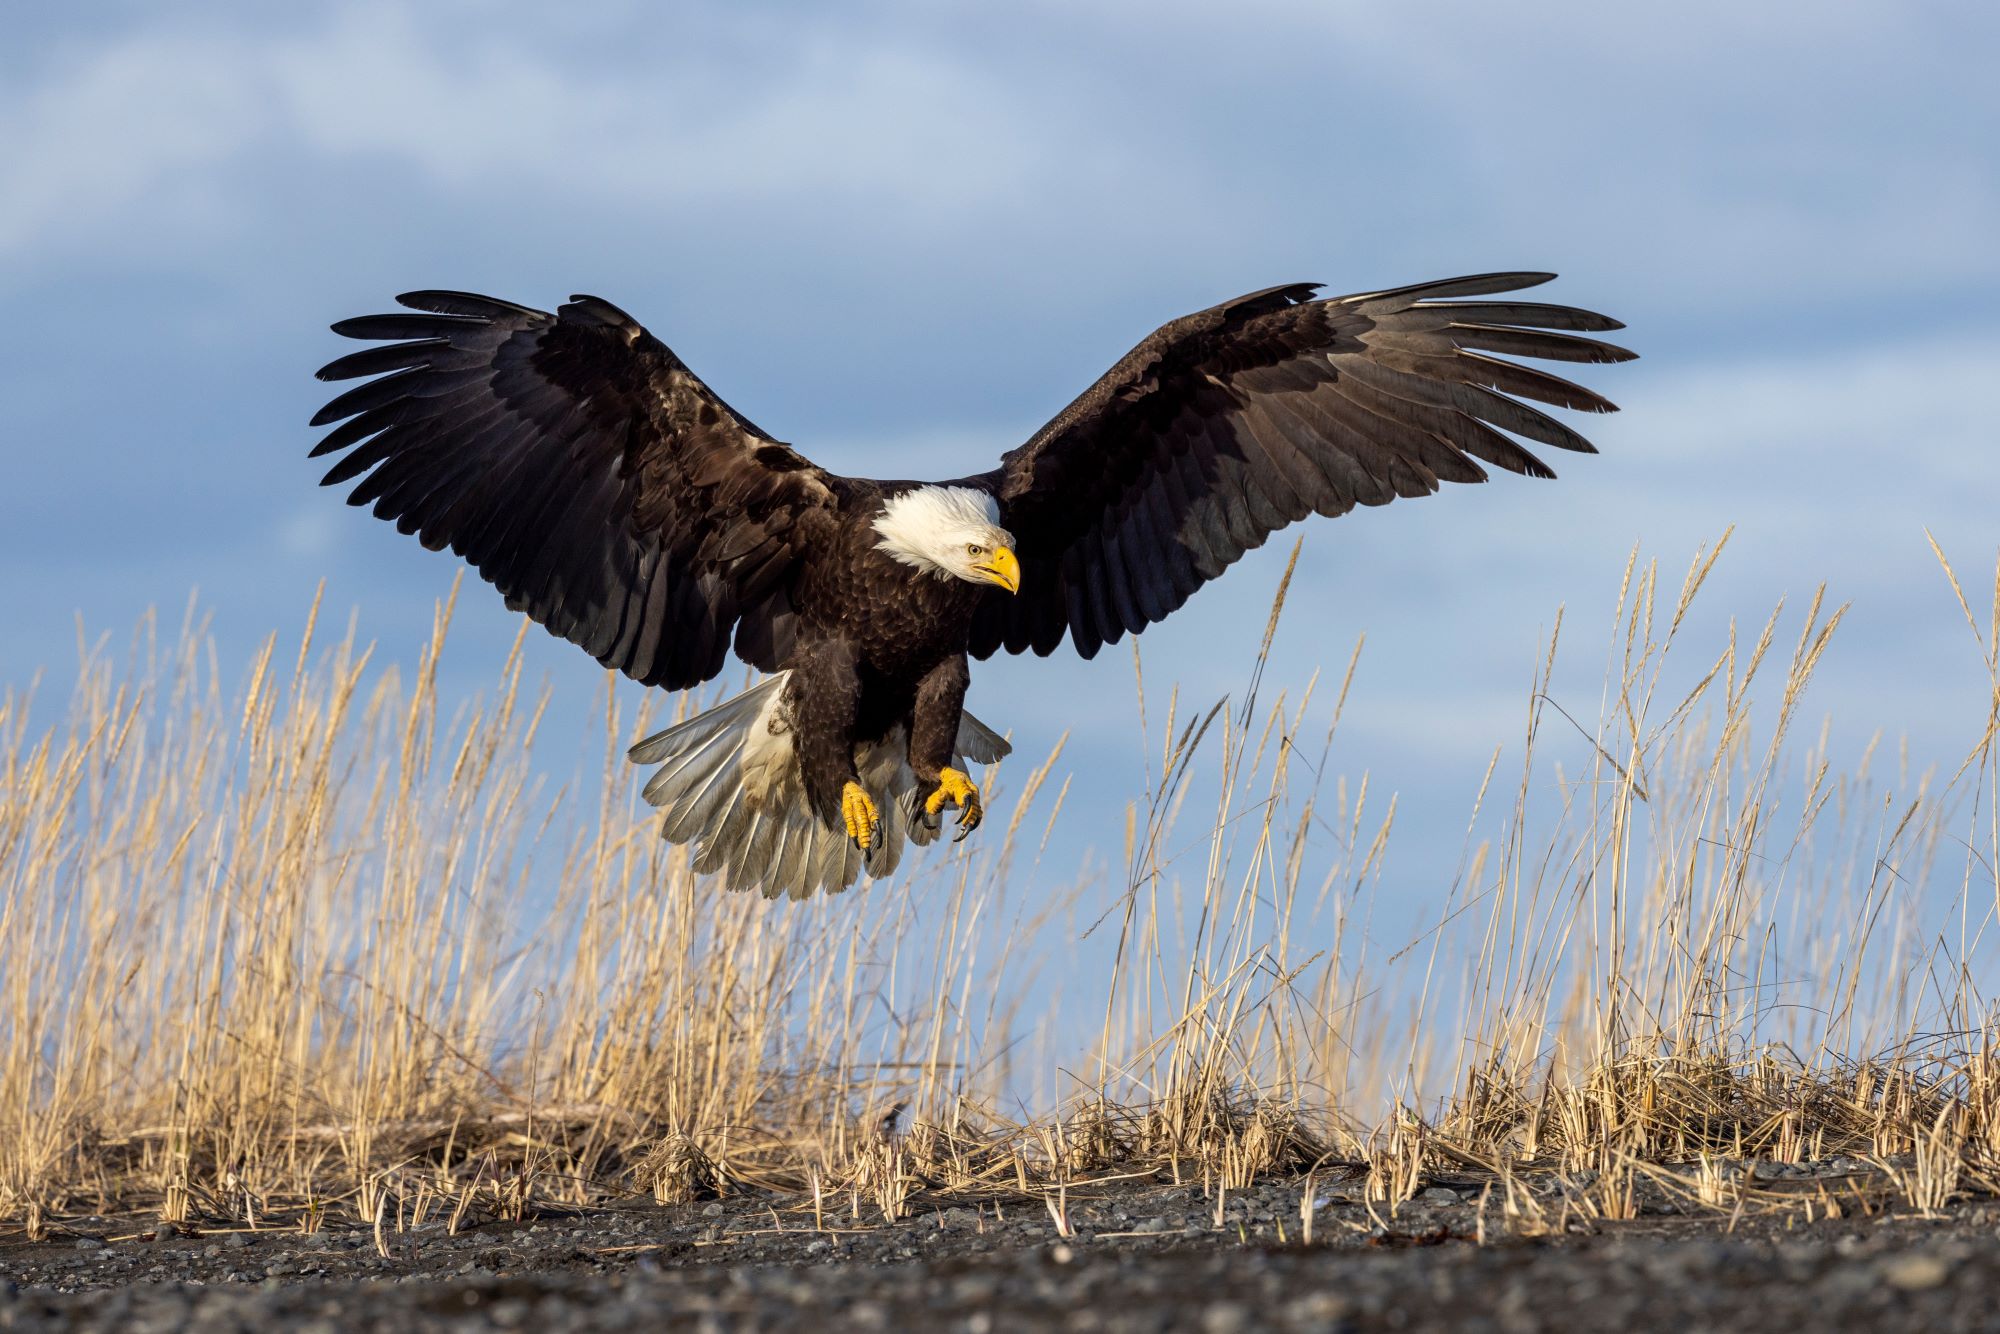 A bald eagle coming in for a lnading.